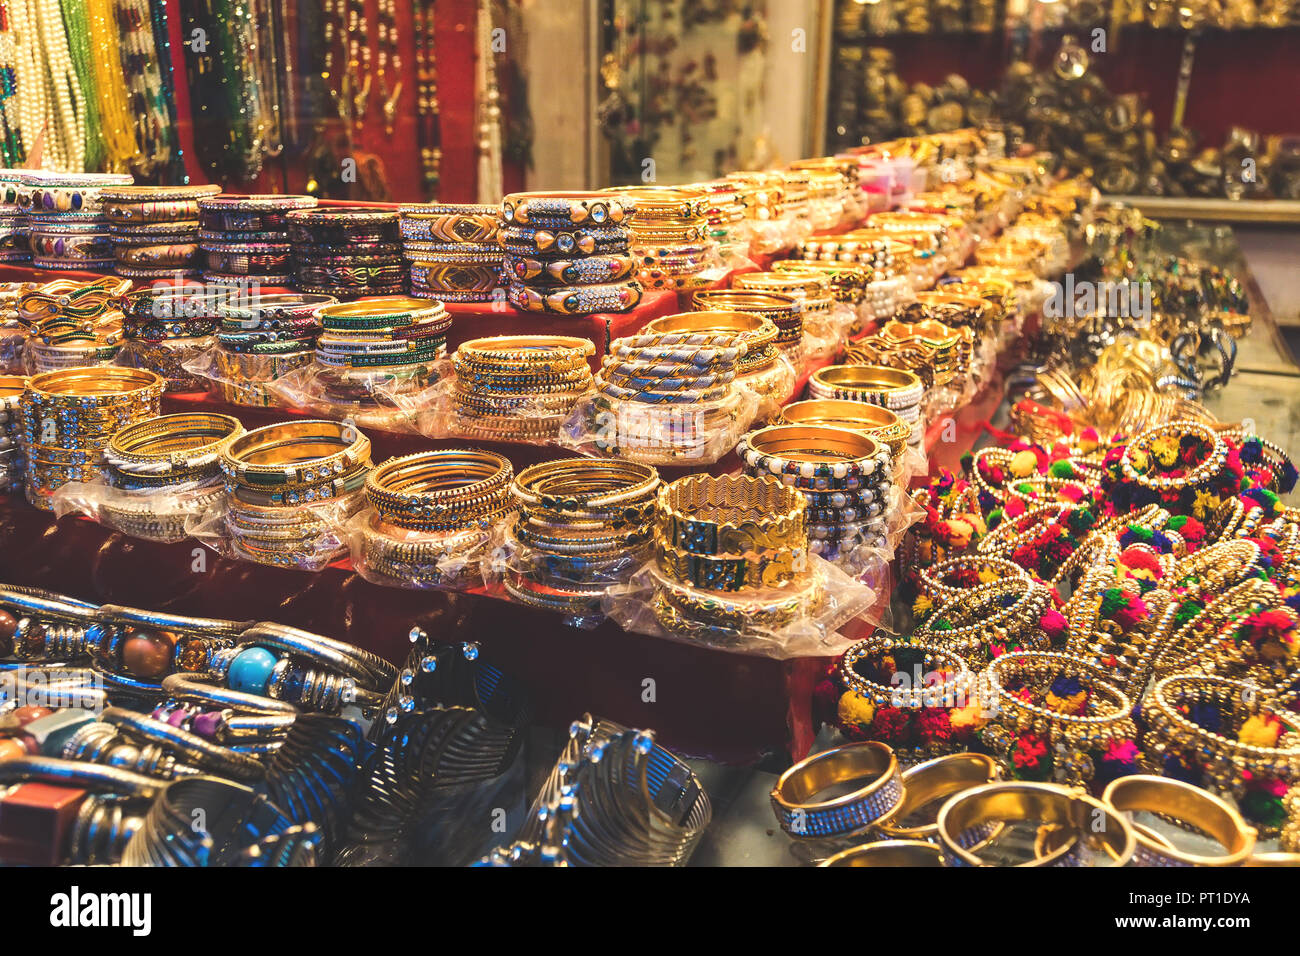 Traditional indian bangles and bracelets at the street market in Udaipur, Rajasthan, India. Jewelry made of gold-plated metal with multicolored stones Stock Photo